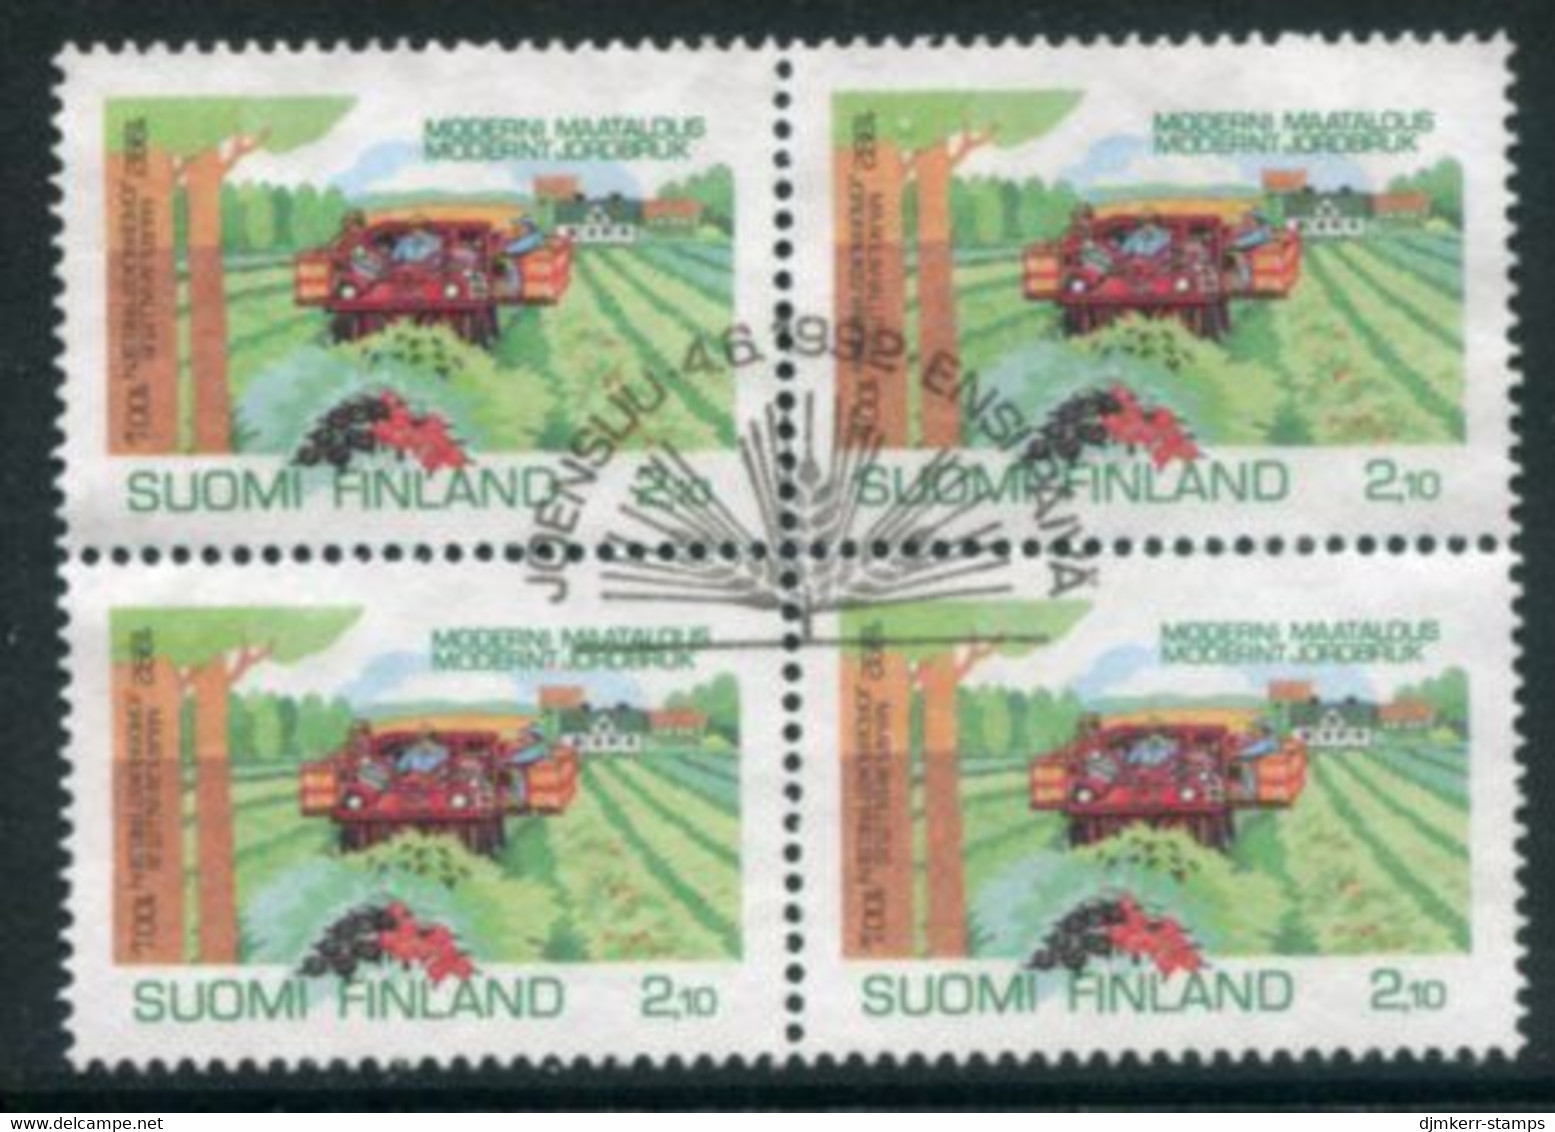 FINLAND 1992 Centenary Of Agriculture Ministry Block Of 4 Used.  Michel 1180 - Usati